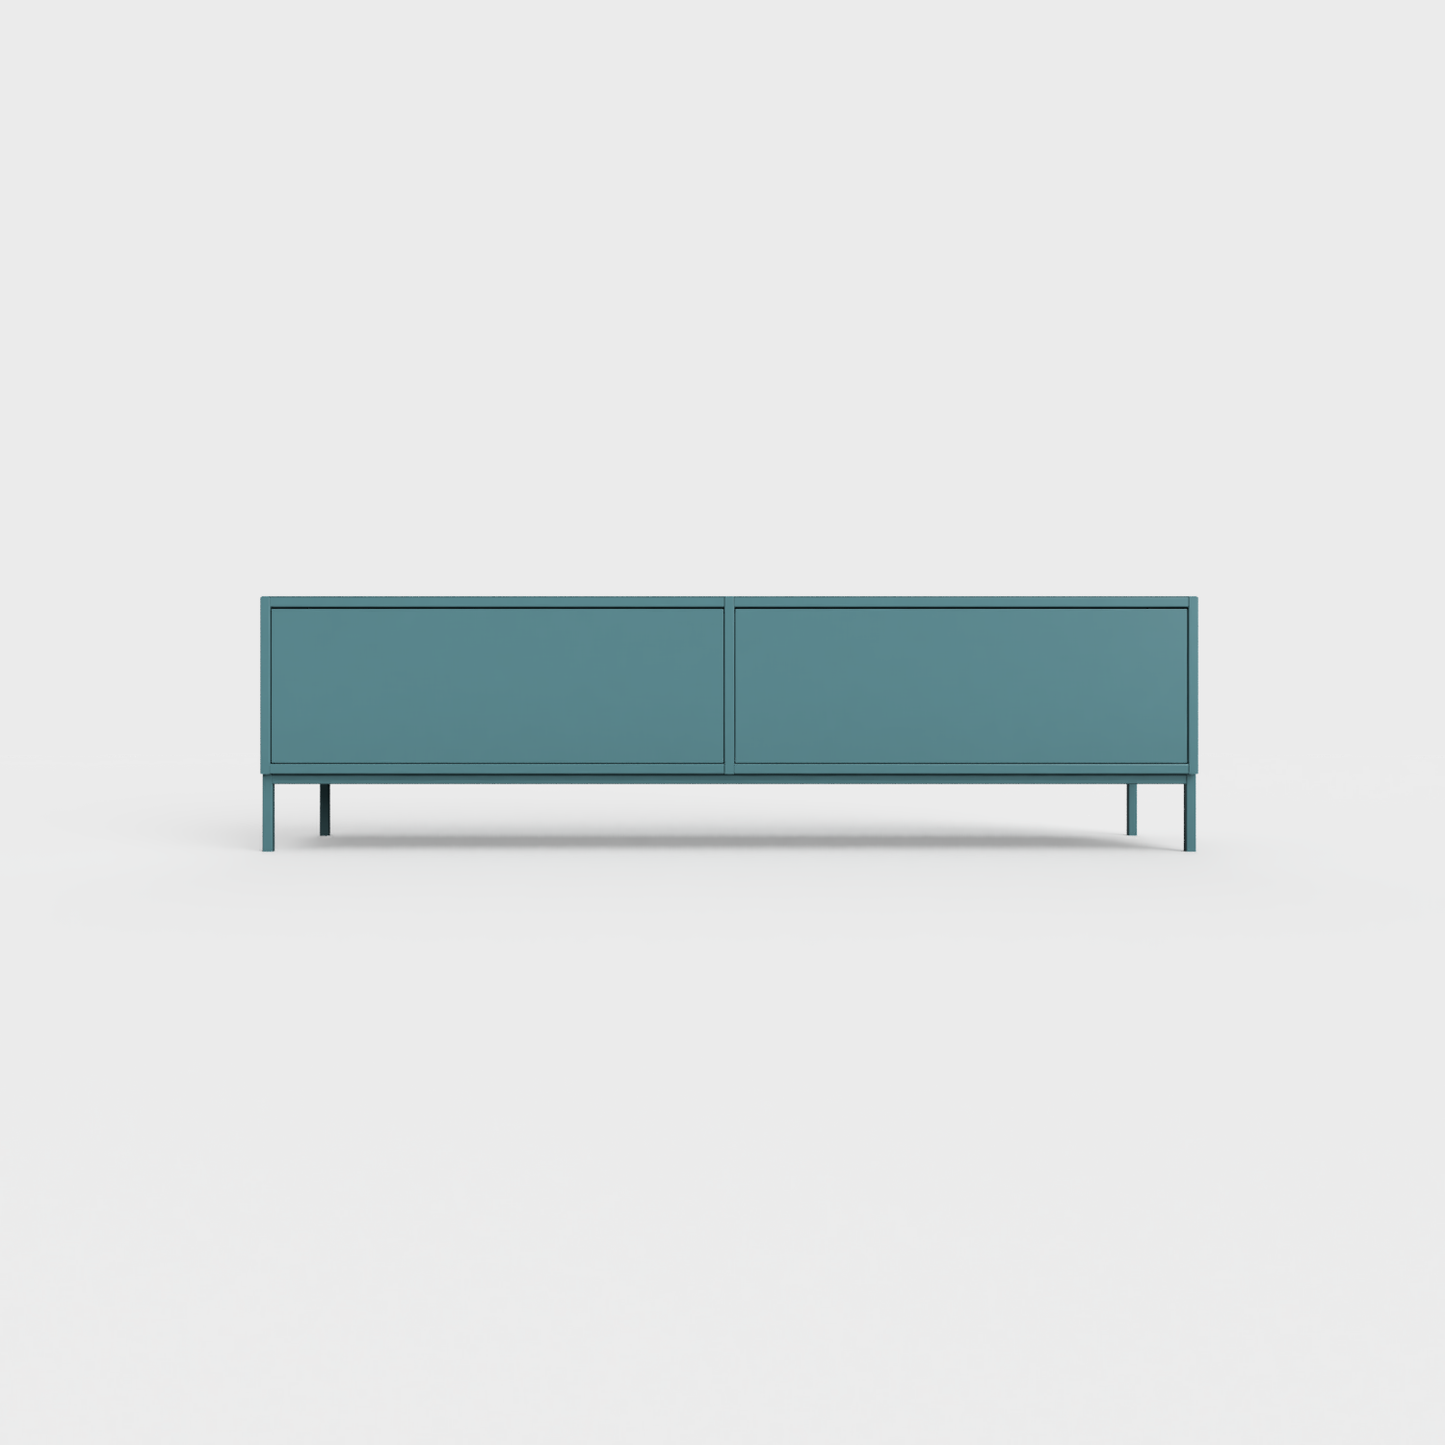 Prunus 01 Lowboard in Turquoise color, powder-coated steel, elegant and modern piece of furniture for your living room